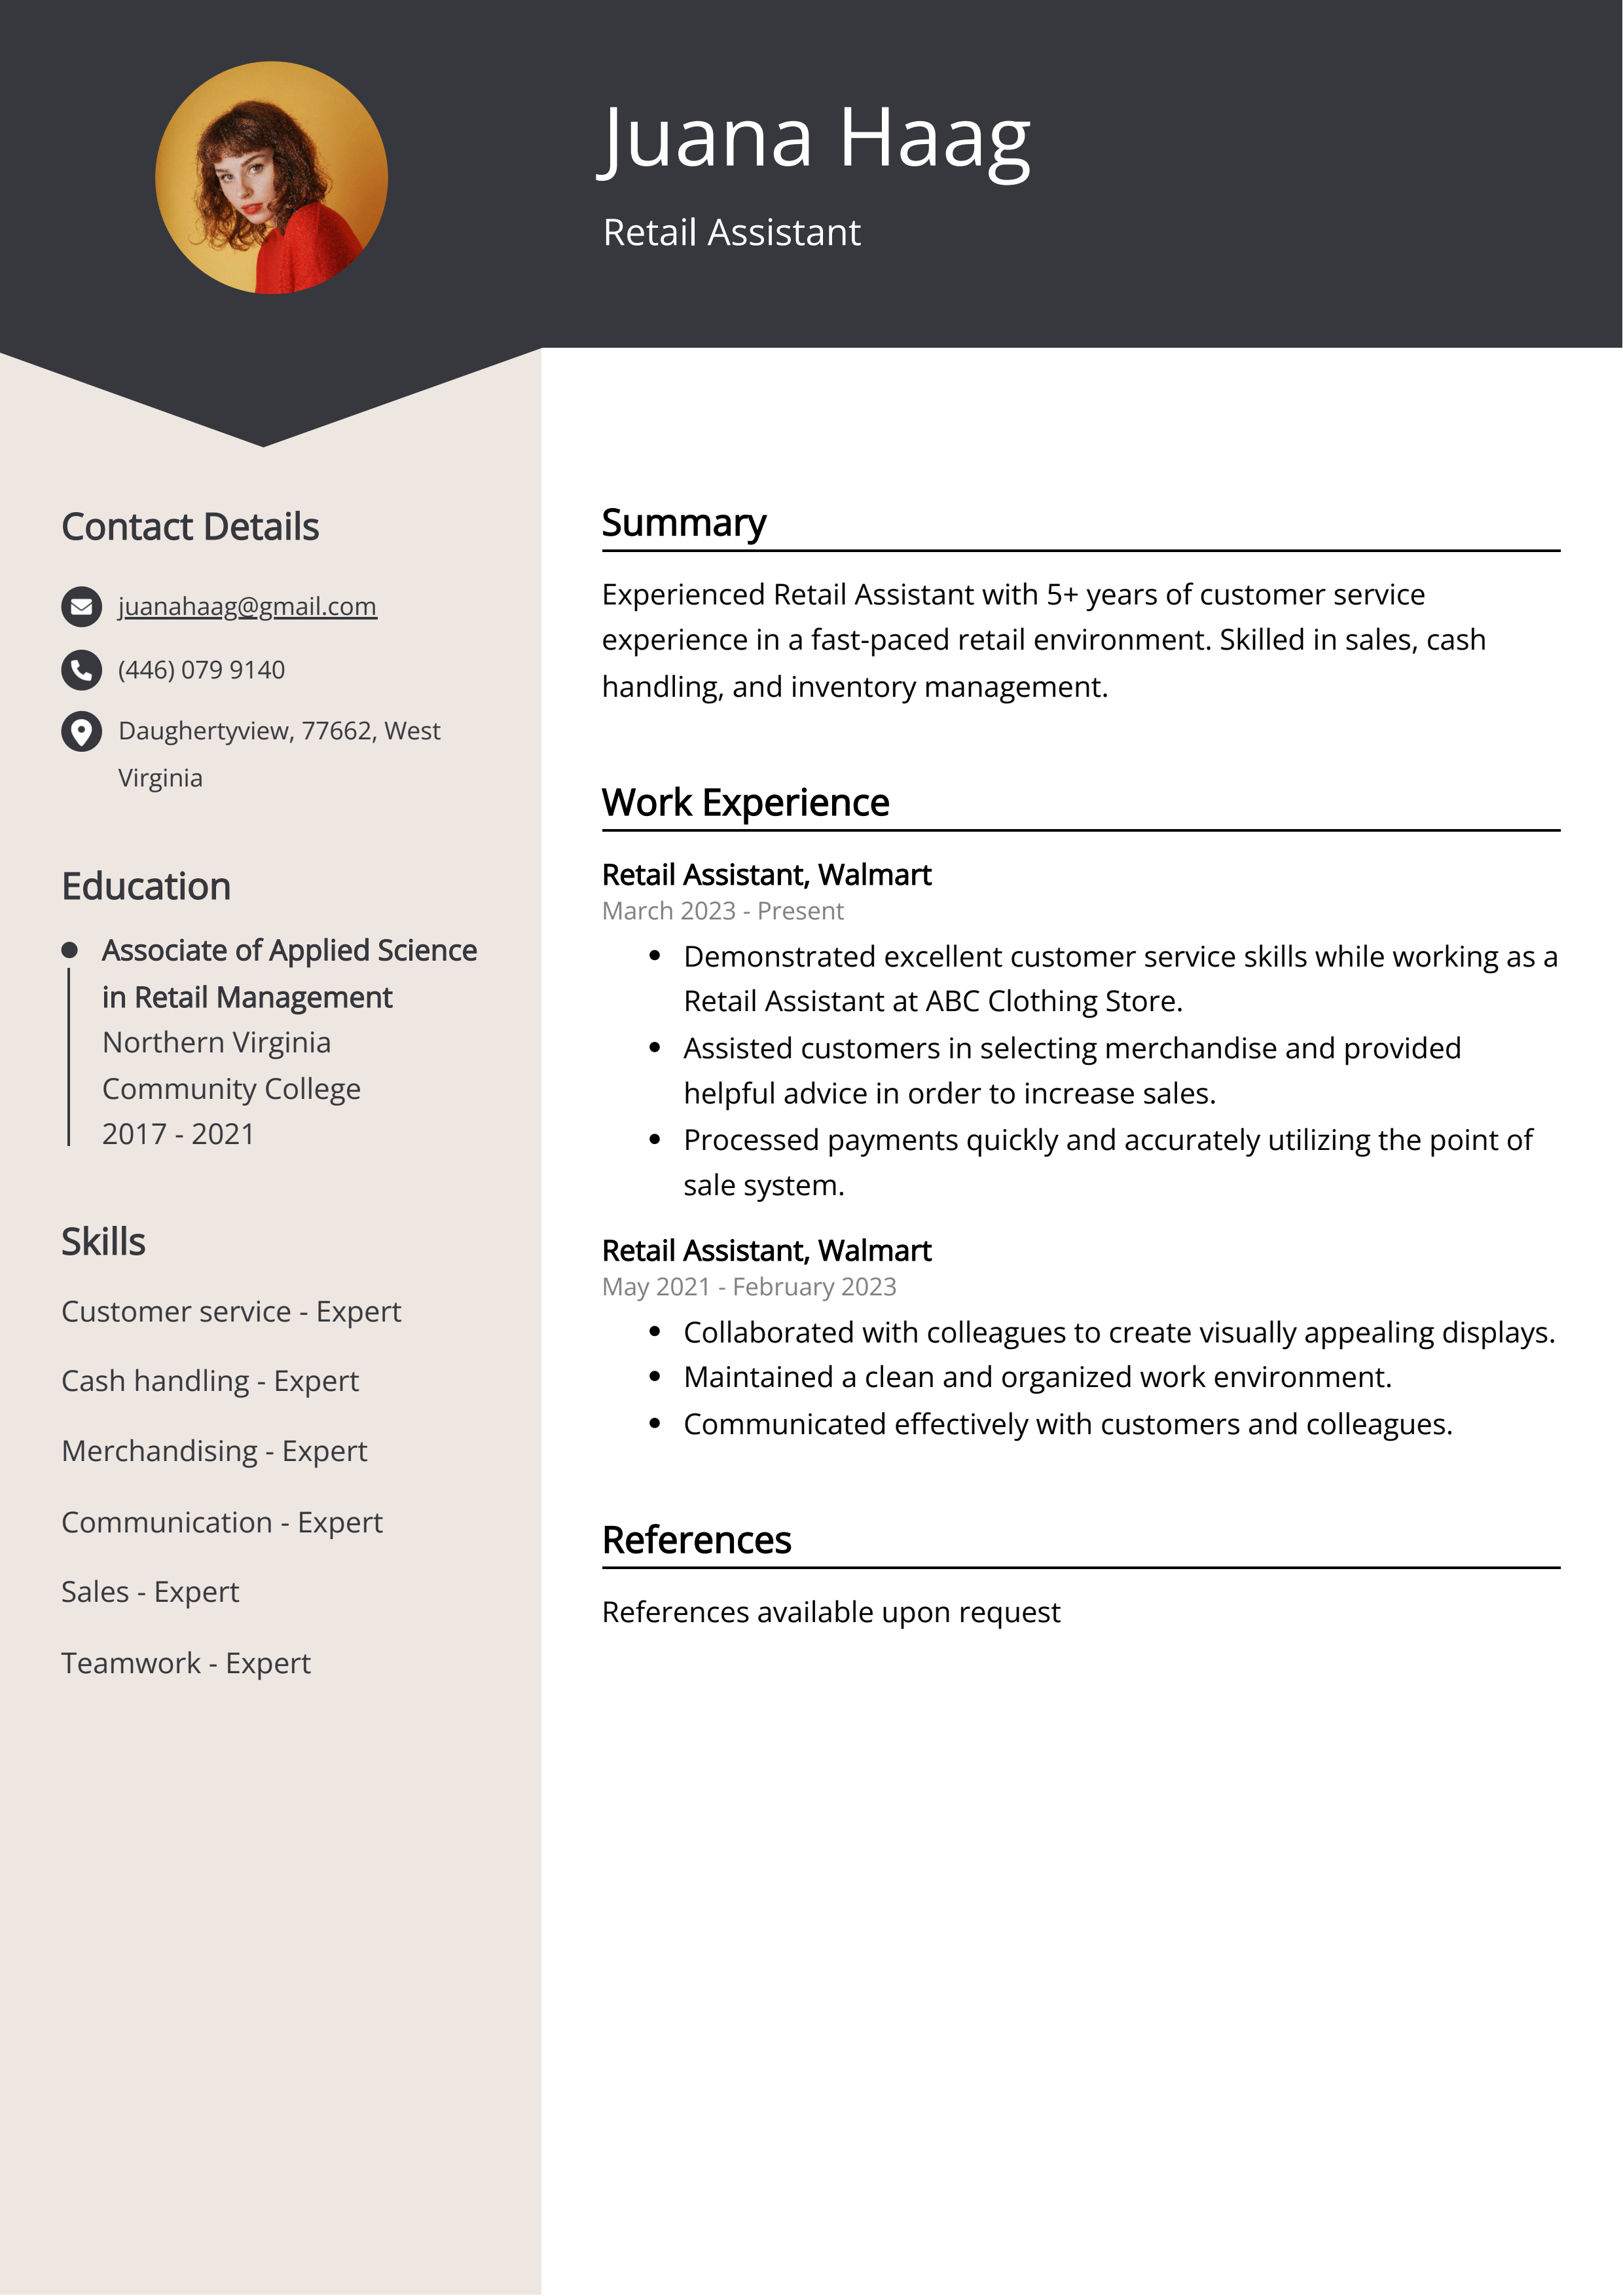 Retail Assistant CV Example